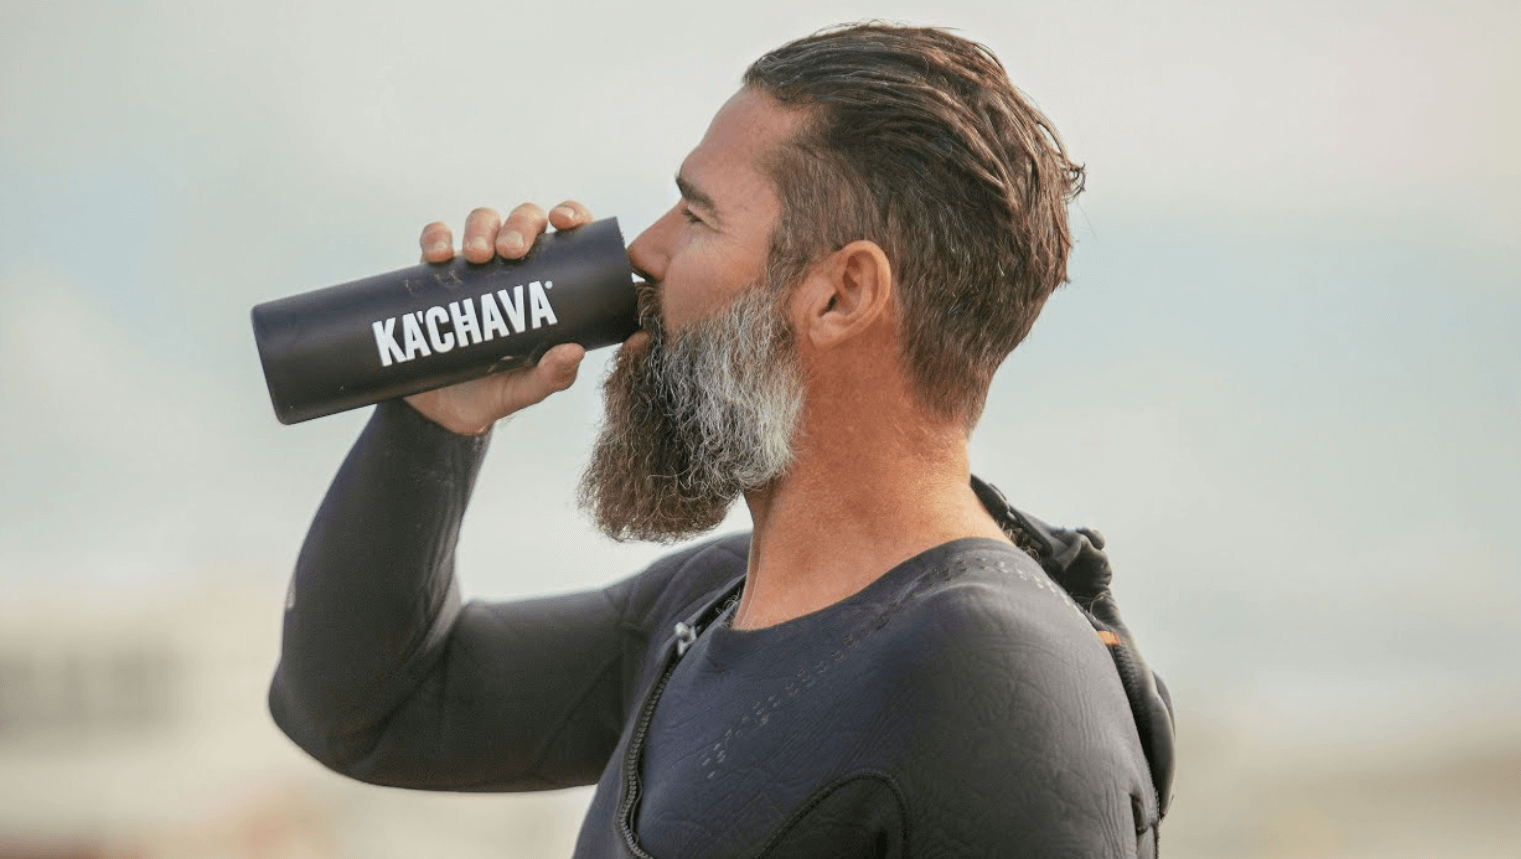 Kachava's nutrient-dense formula, delicious taste, and convenience make it the ideal superfood meal replacement.